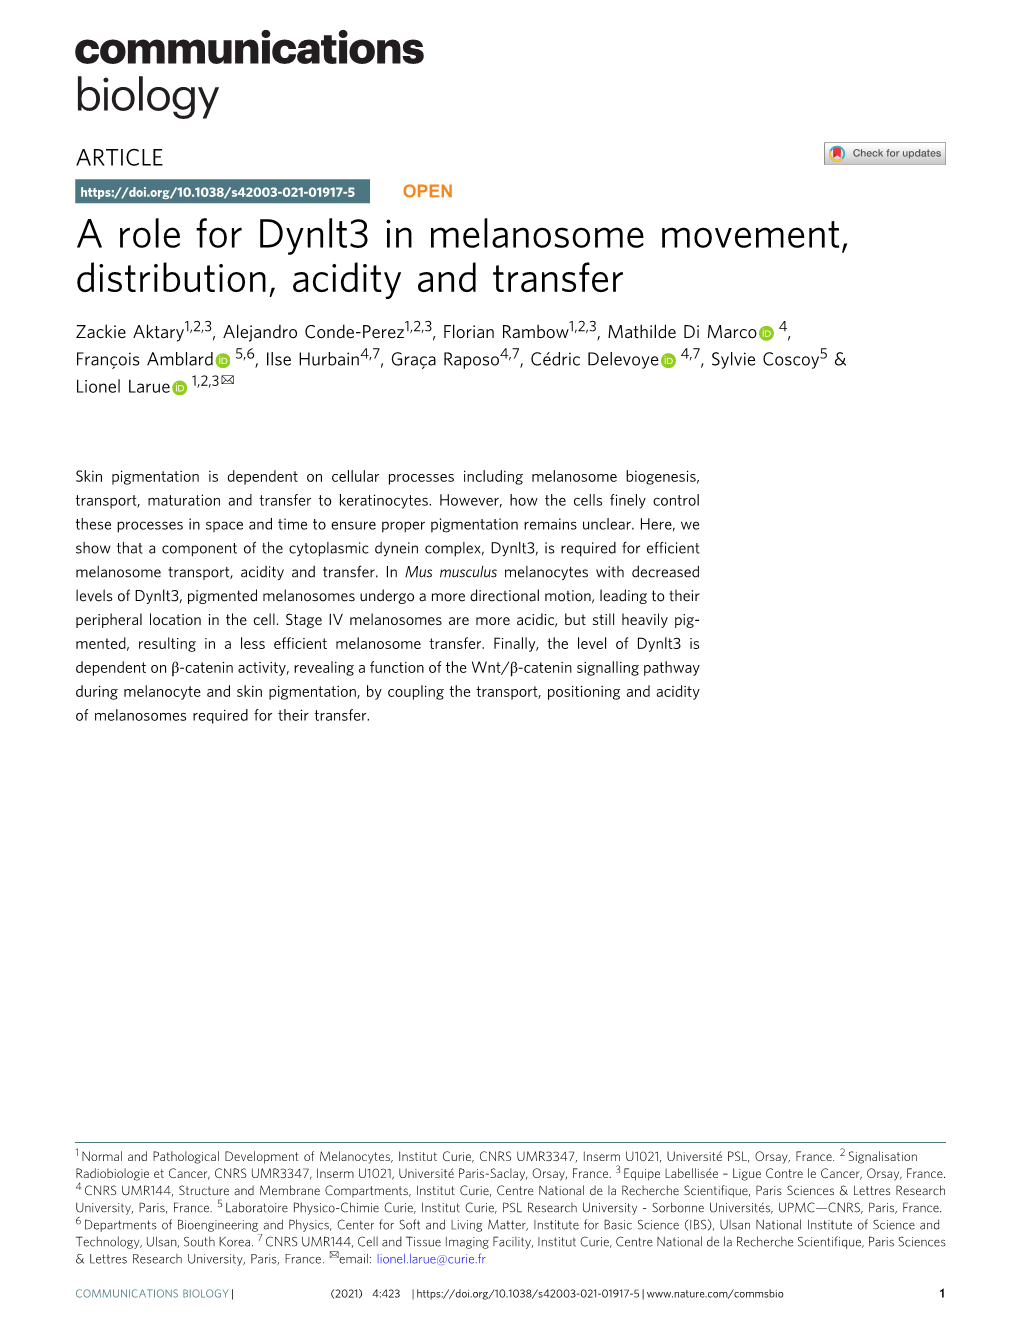 A Role for Dynlt3 in Melanosome Movement, Distribution, Acidity and Transfer